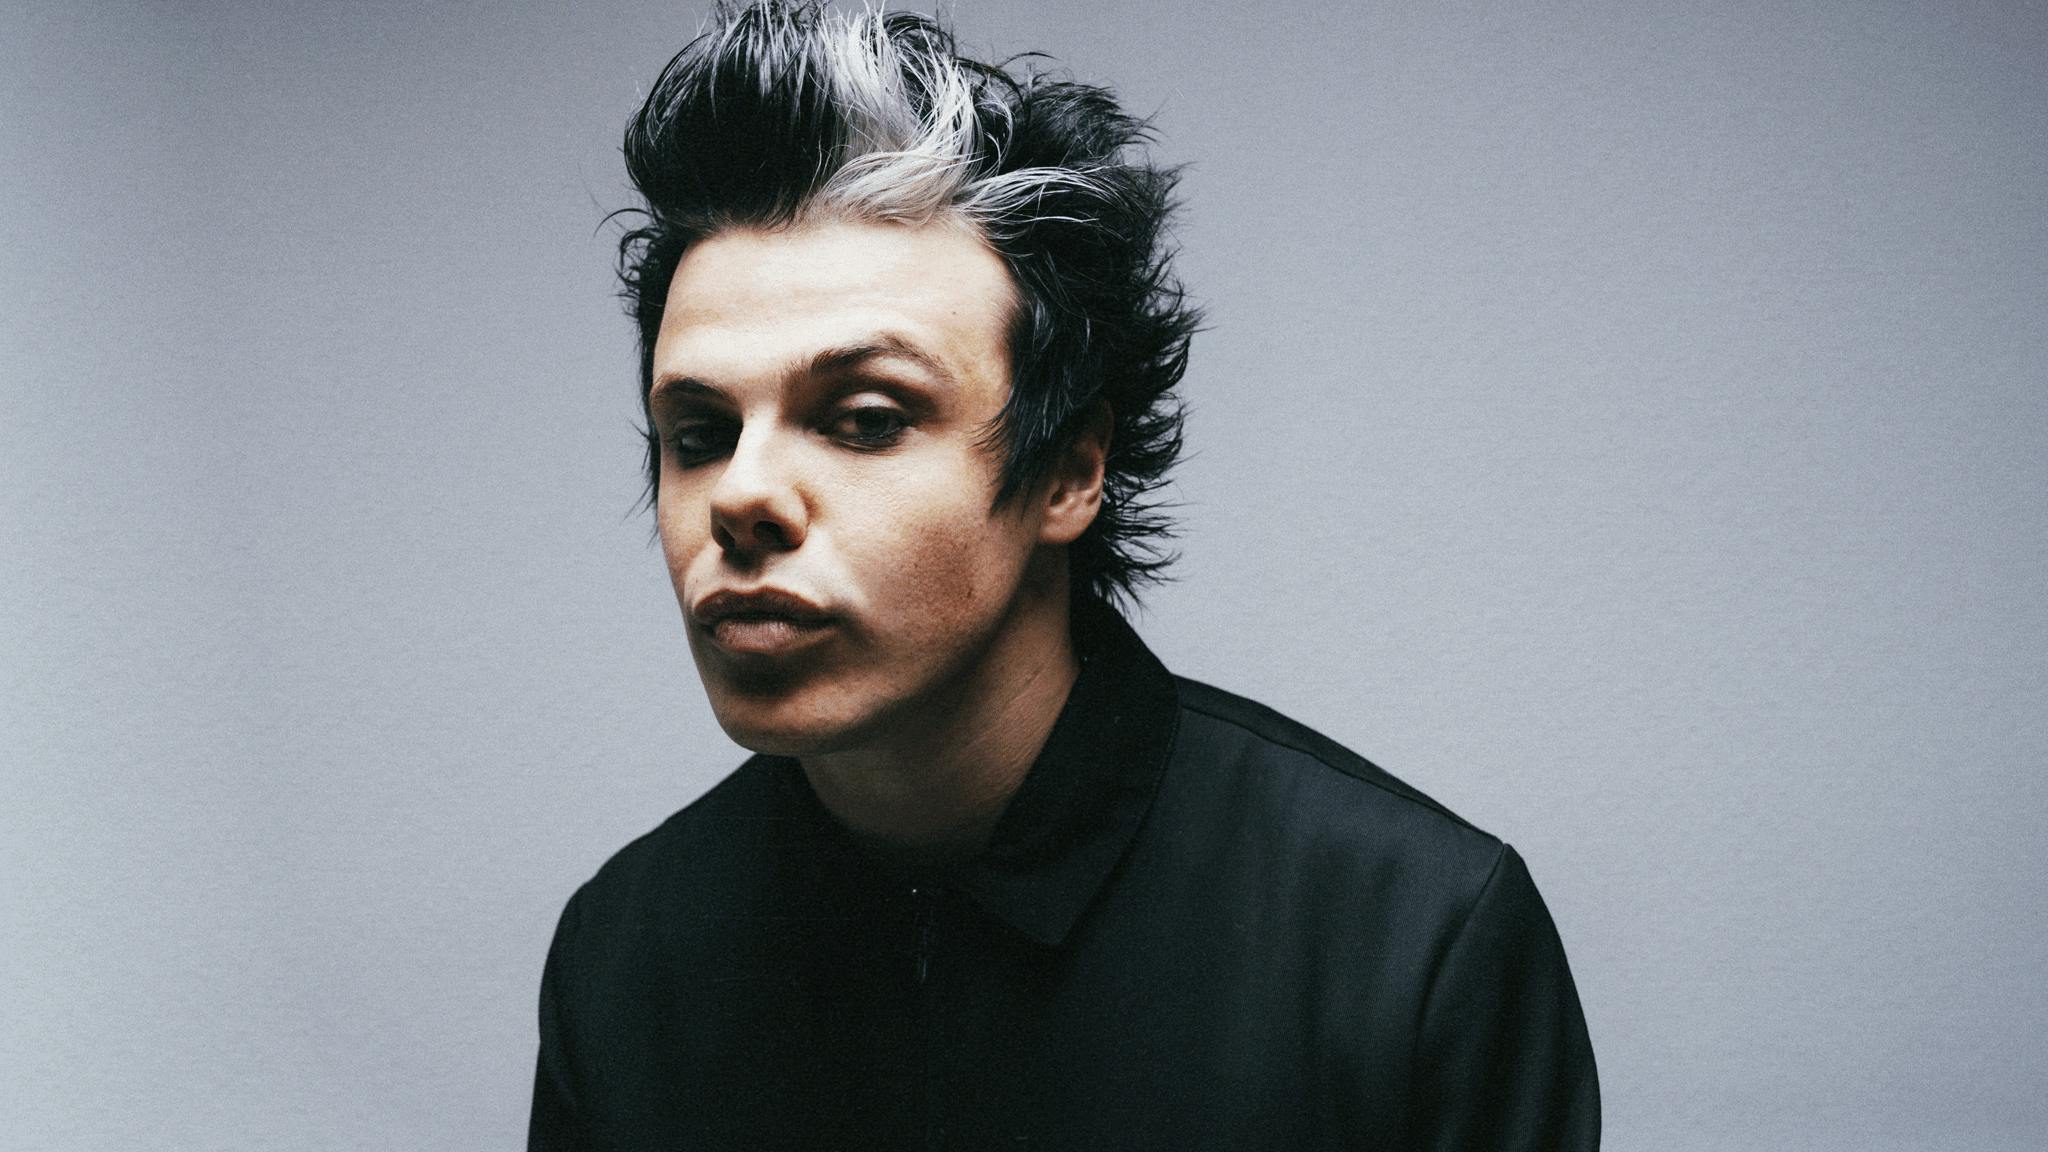 YUNGBLUD is offering $20 tickets for his North American tour